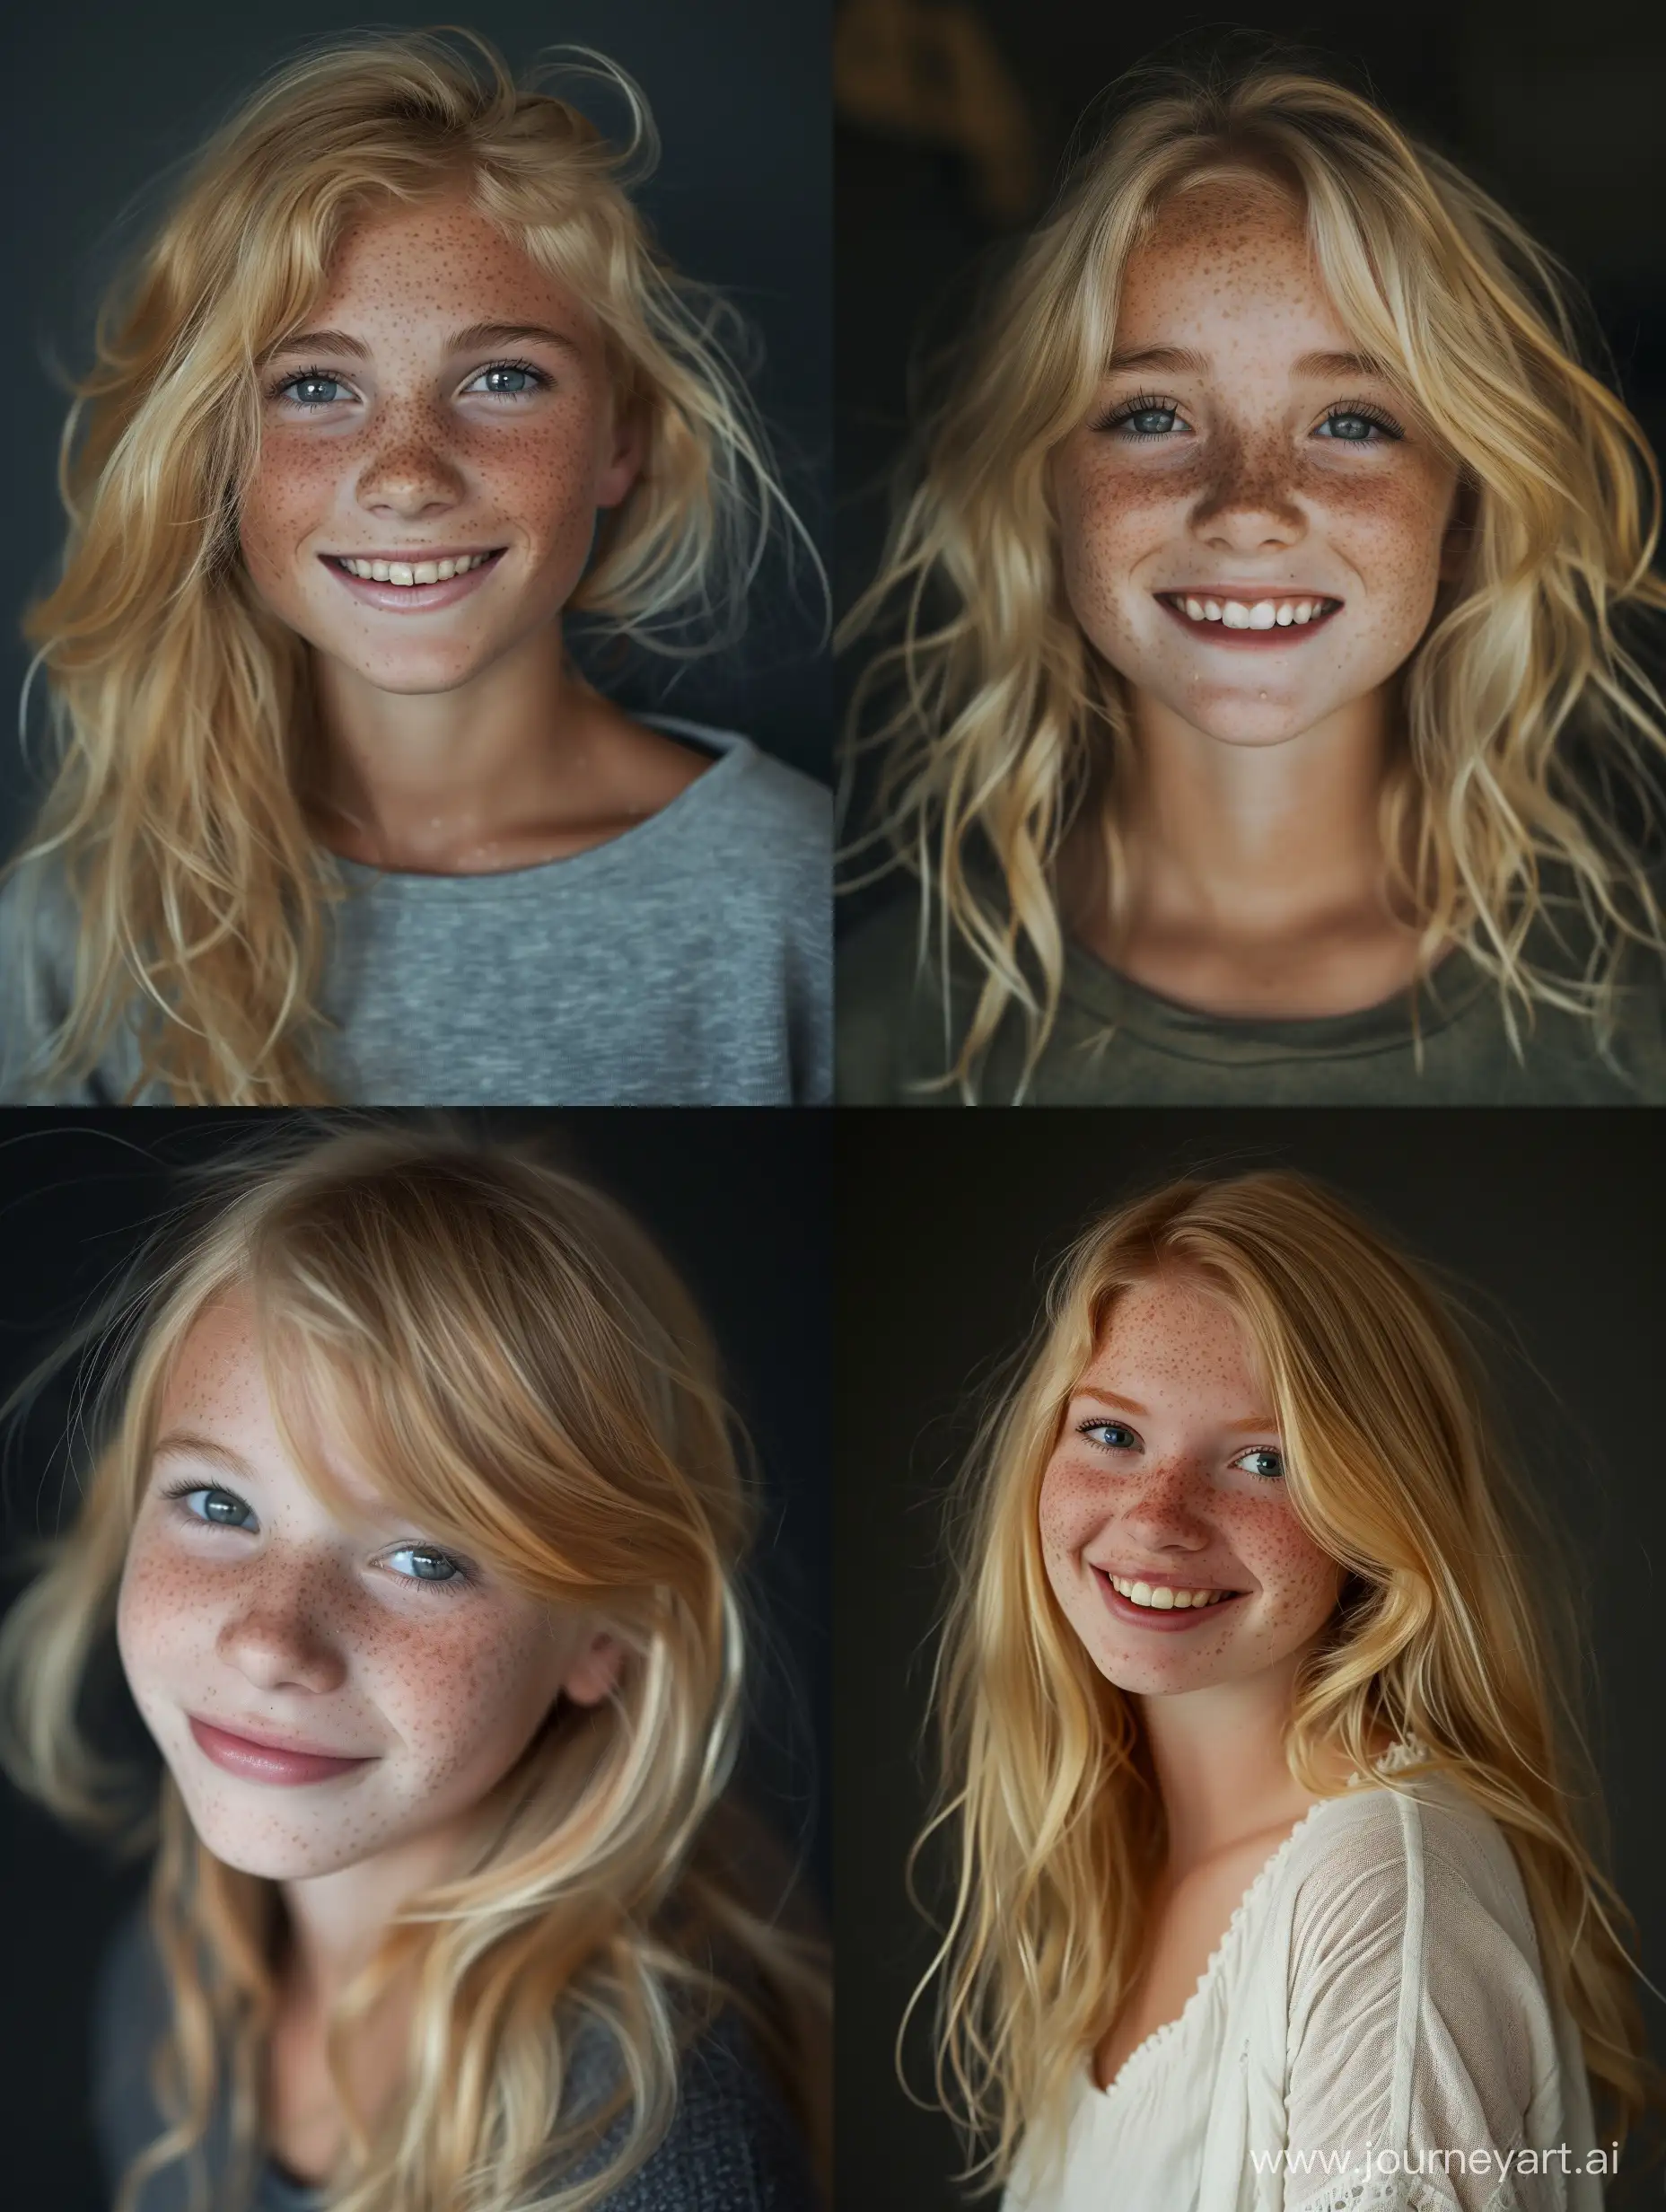 Blonde girl with freckles, smiling. Dramatic lighting.